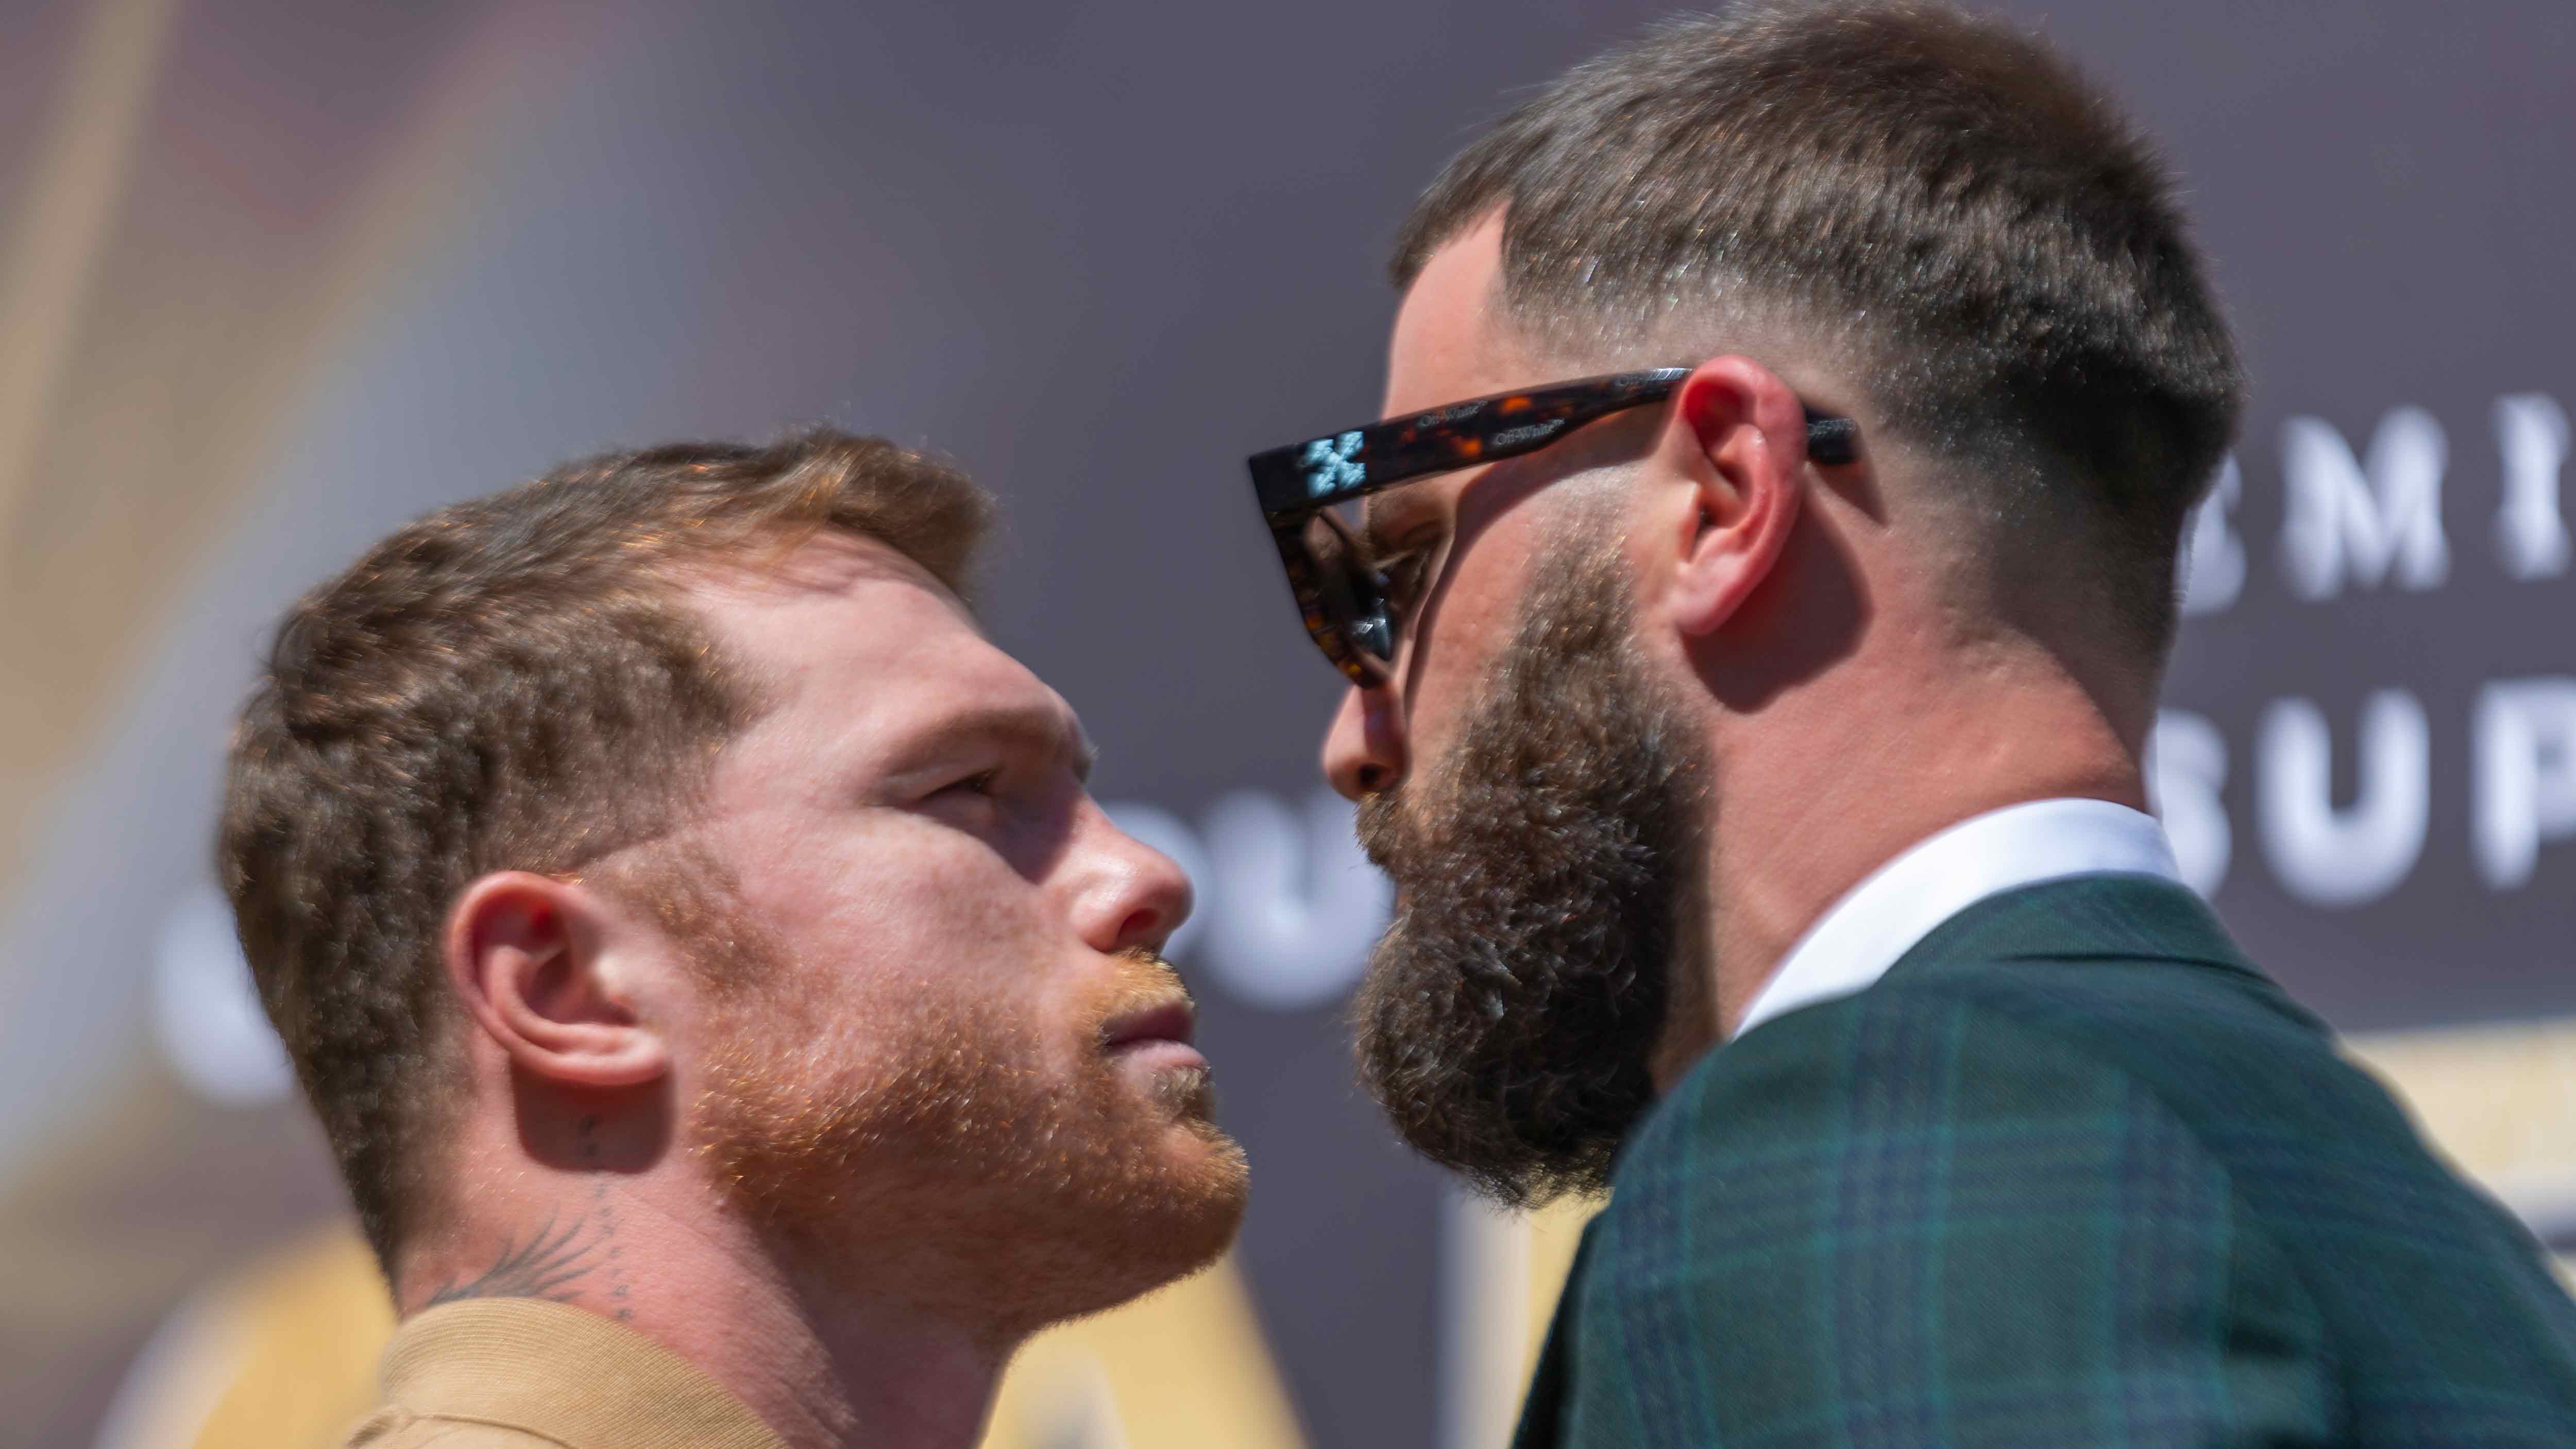 Photo and Video Highlights of the Epic Canelo vs